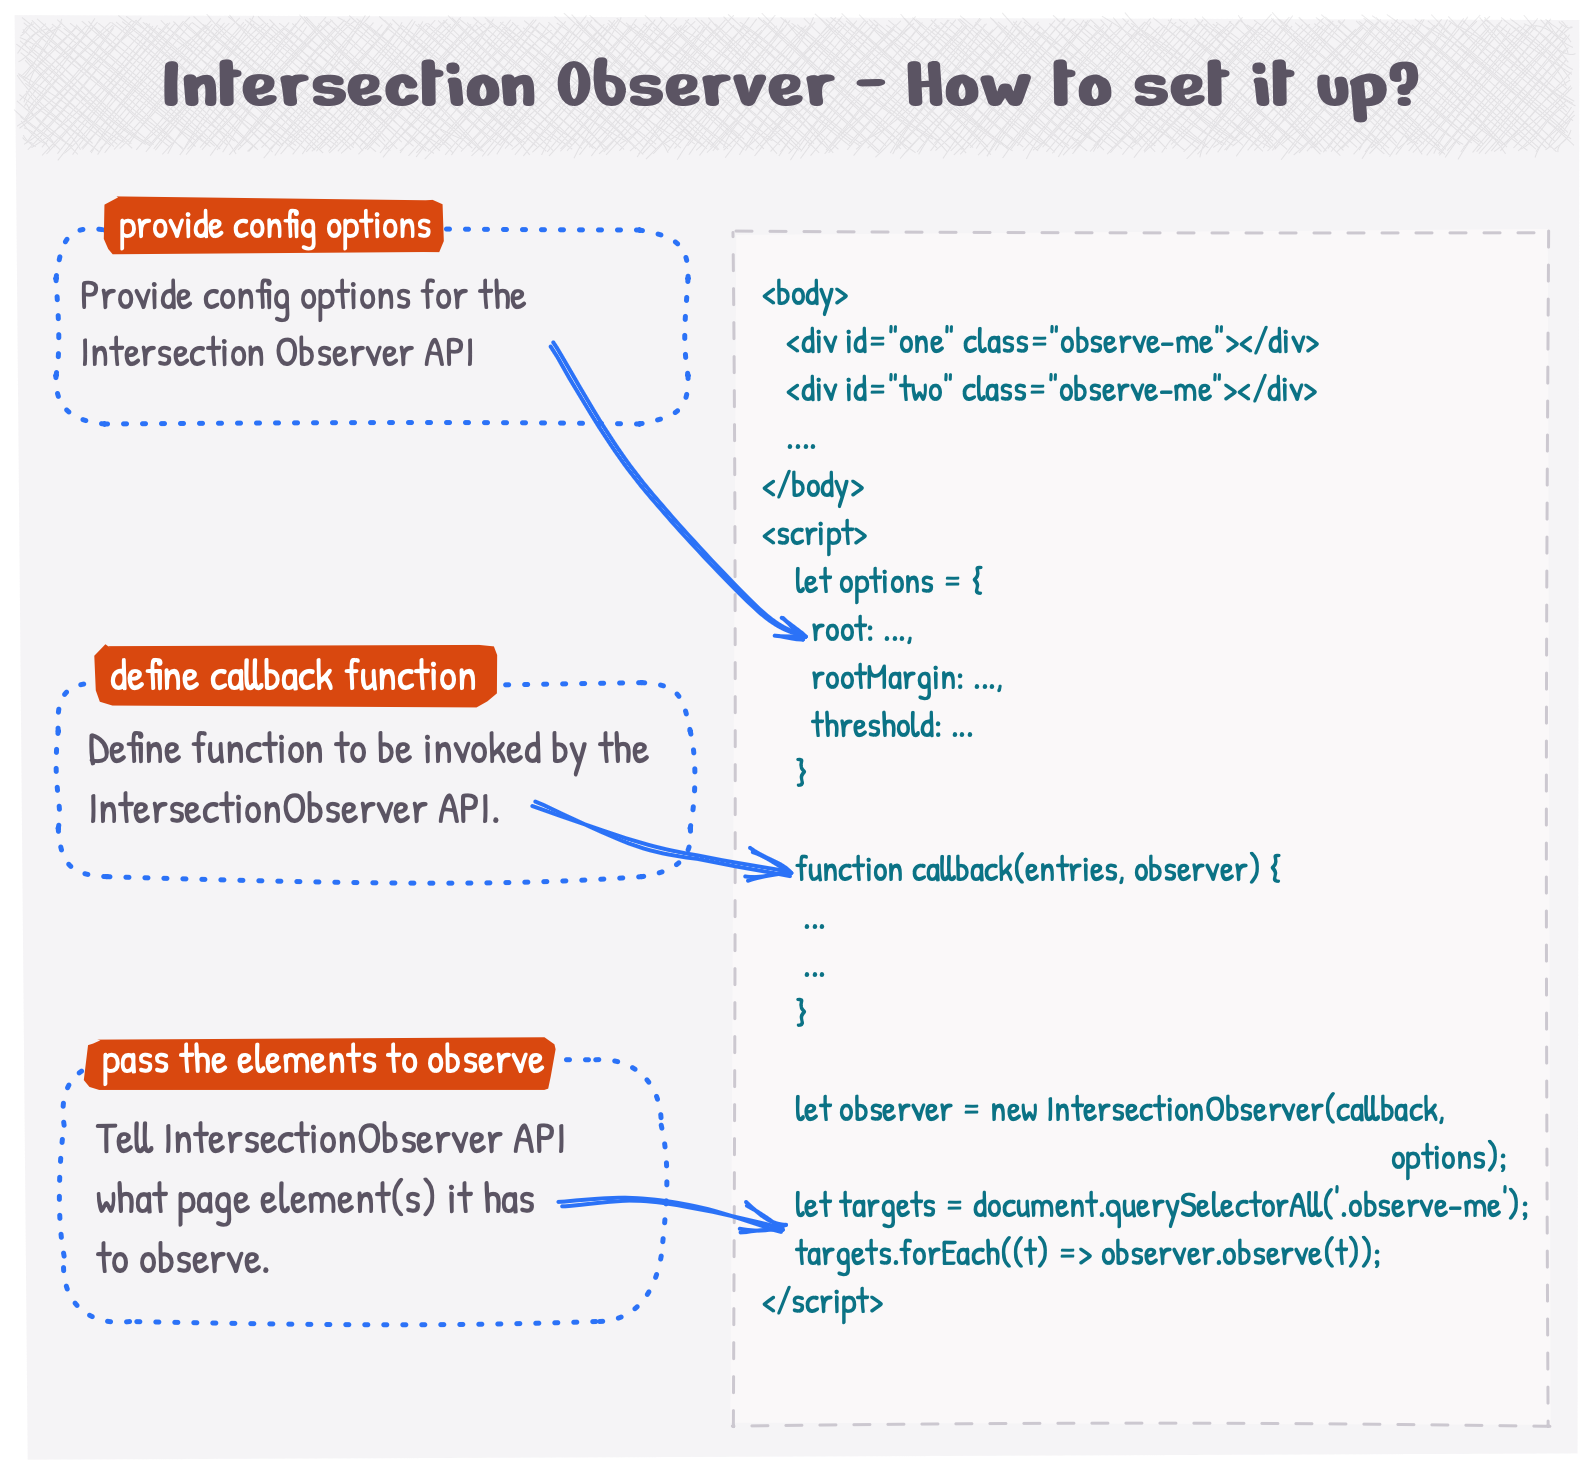 How to setup Intersection Observer